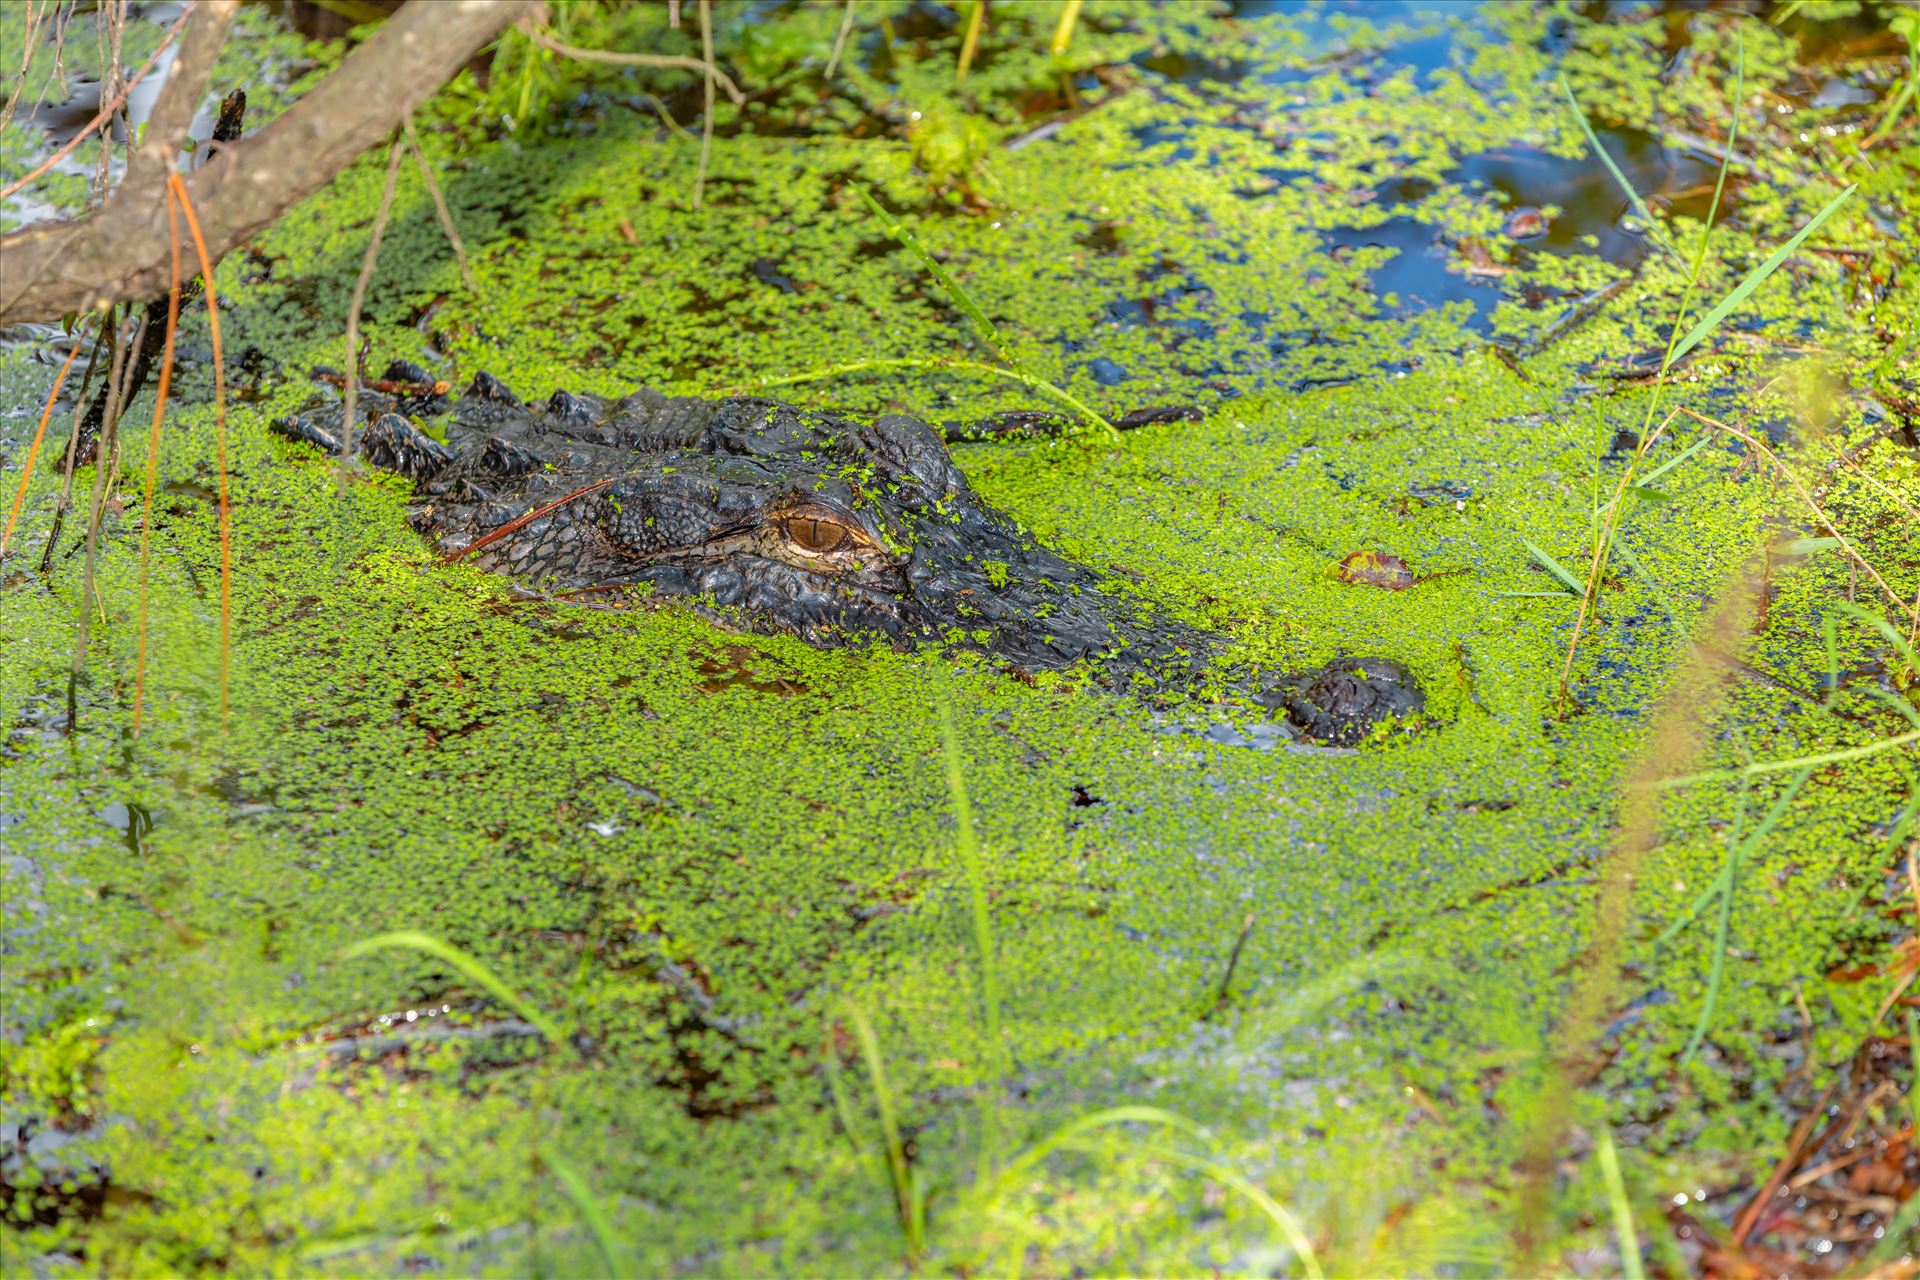 3-4 foot alligator at the very edge of path, gator lake at st andrews state park ss as-8502097.jpg Scary that I didn't see this guy until I was right in front of him! On the path beside gator lake in St. Andrews state park, Florida by Terry Kelly Photography